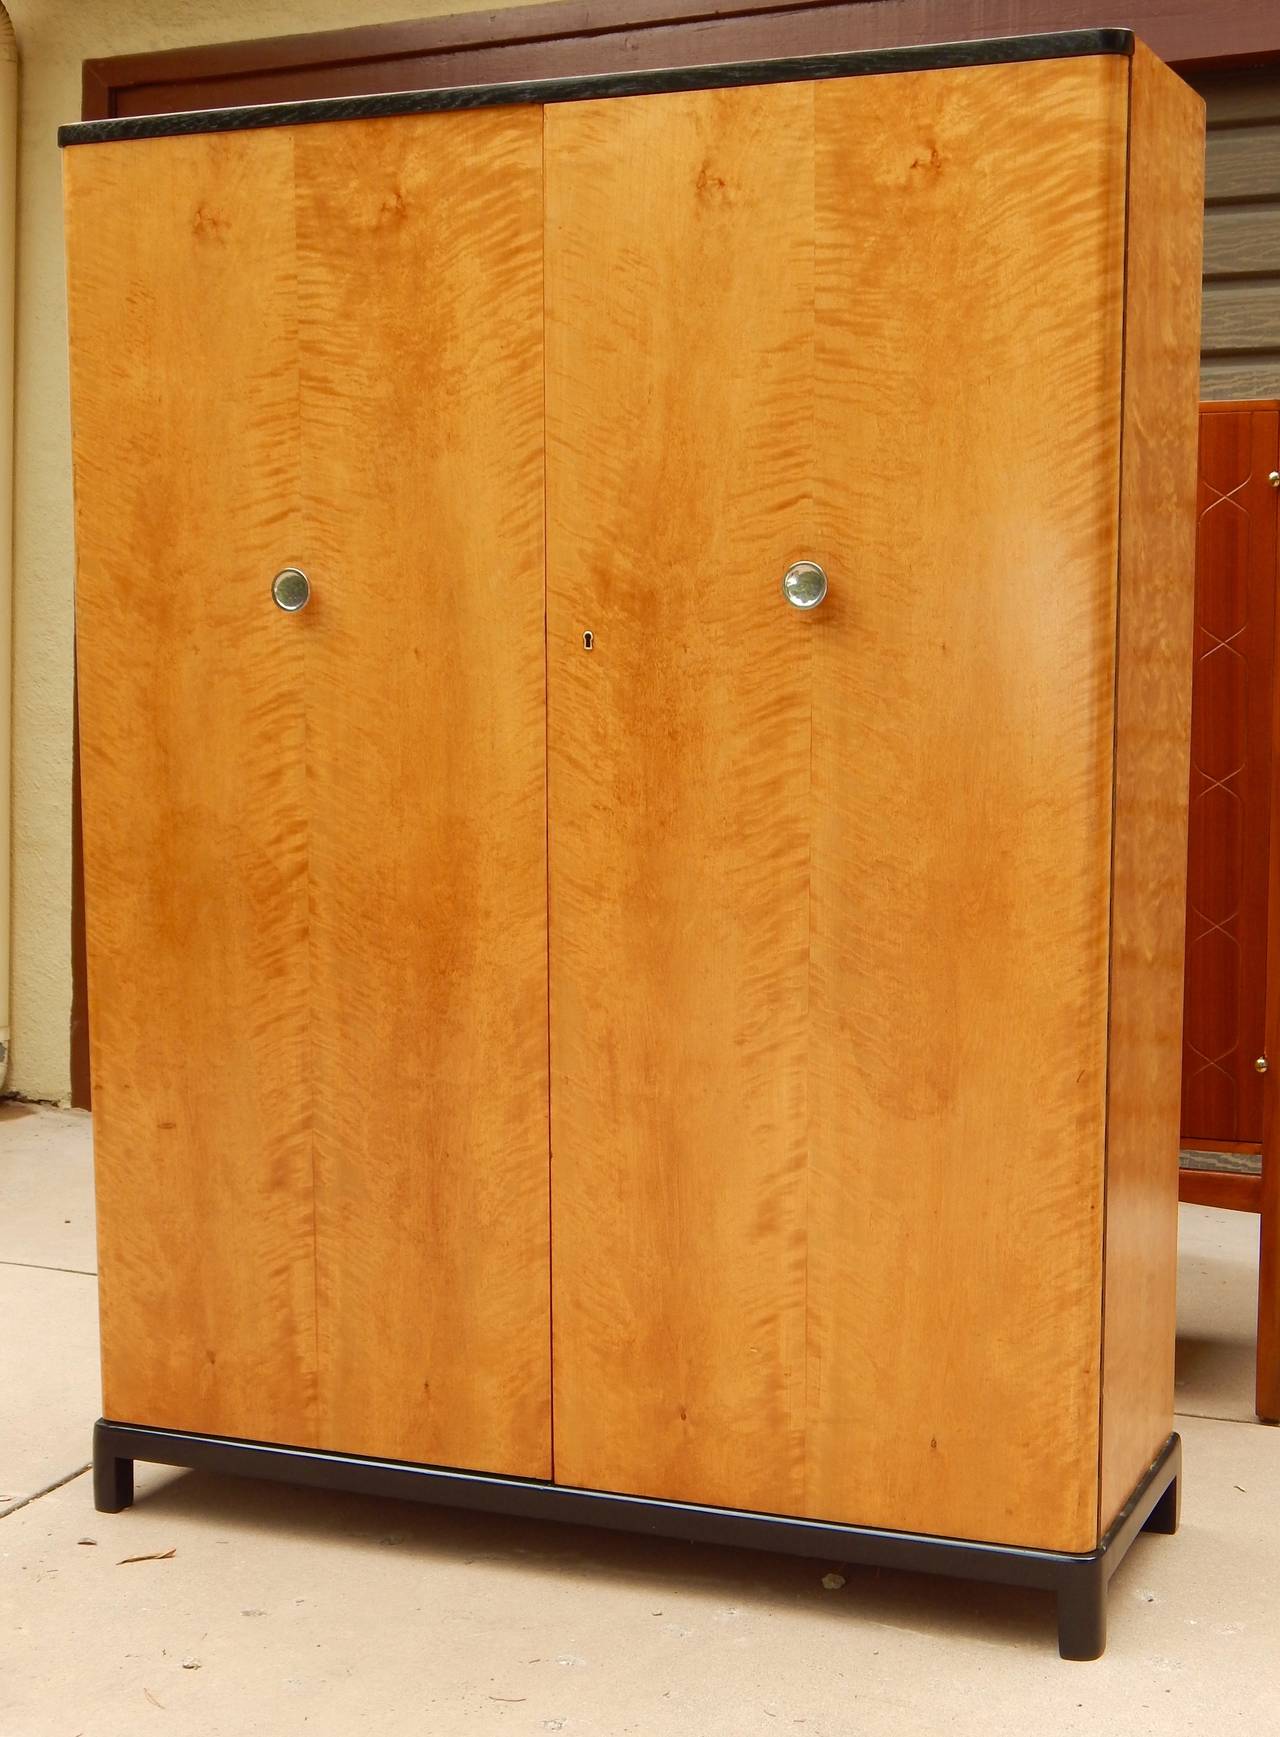 Swedish Art Deco era storage cabinet in highly figured, bookmatched golden flame birchwood. Interior composed of sliding drawers and adjustable shelves. There are six original shelves (photographed here stacked, not hung). Original knobs in polished